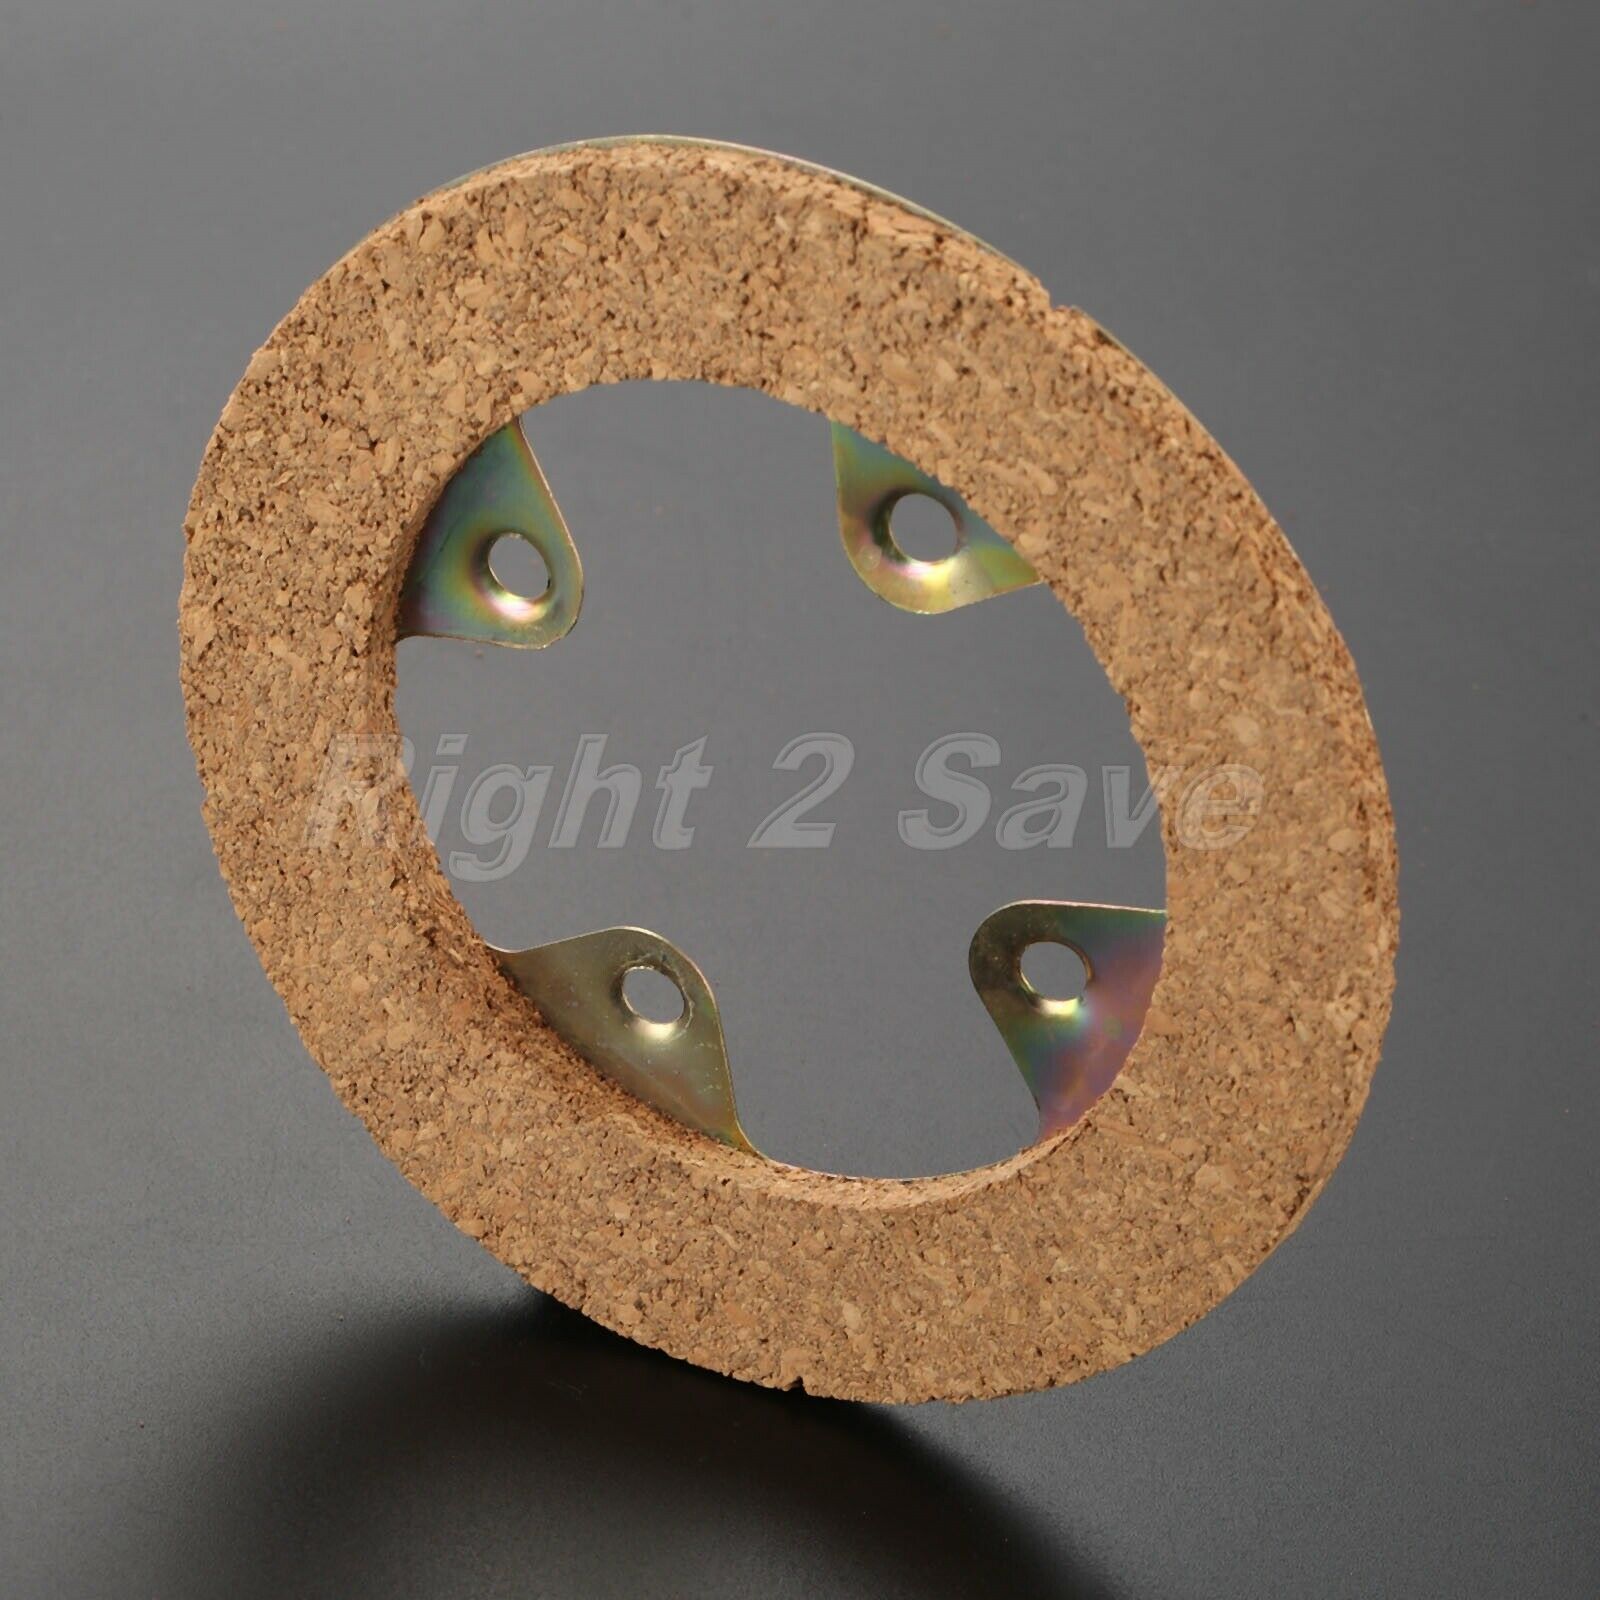 Industrial Sewing Machine Motor Friction Clutch Brakes Plate Disc Machine Parts